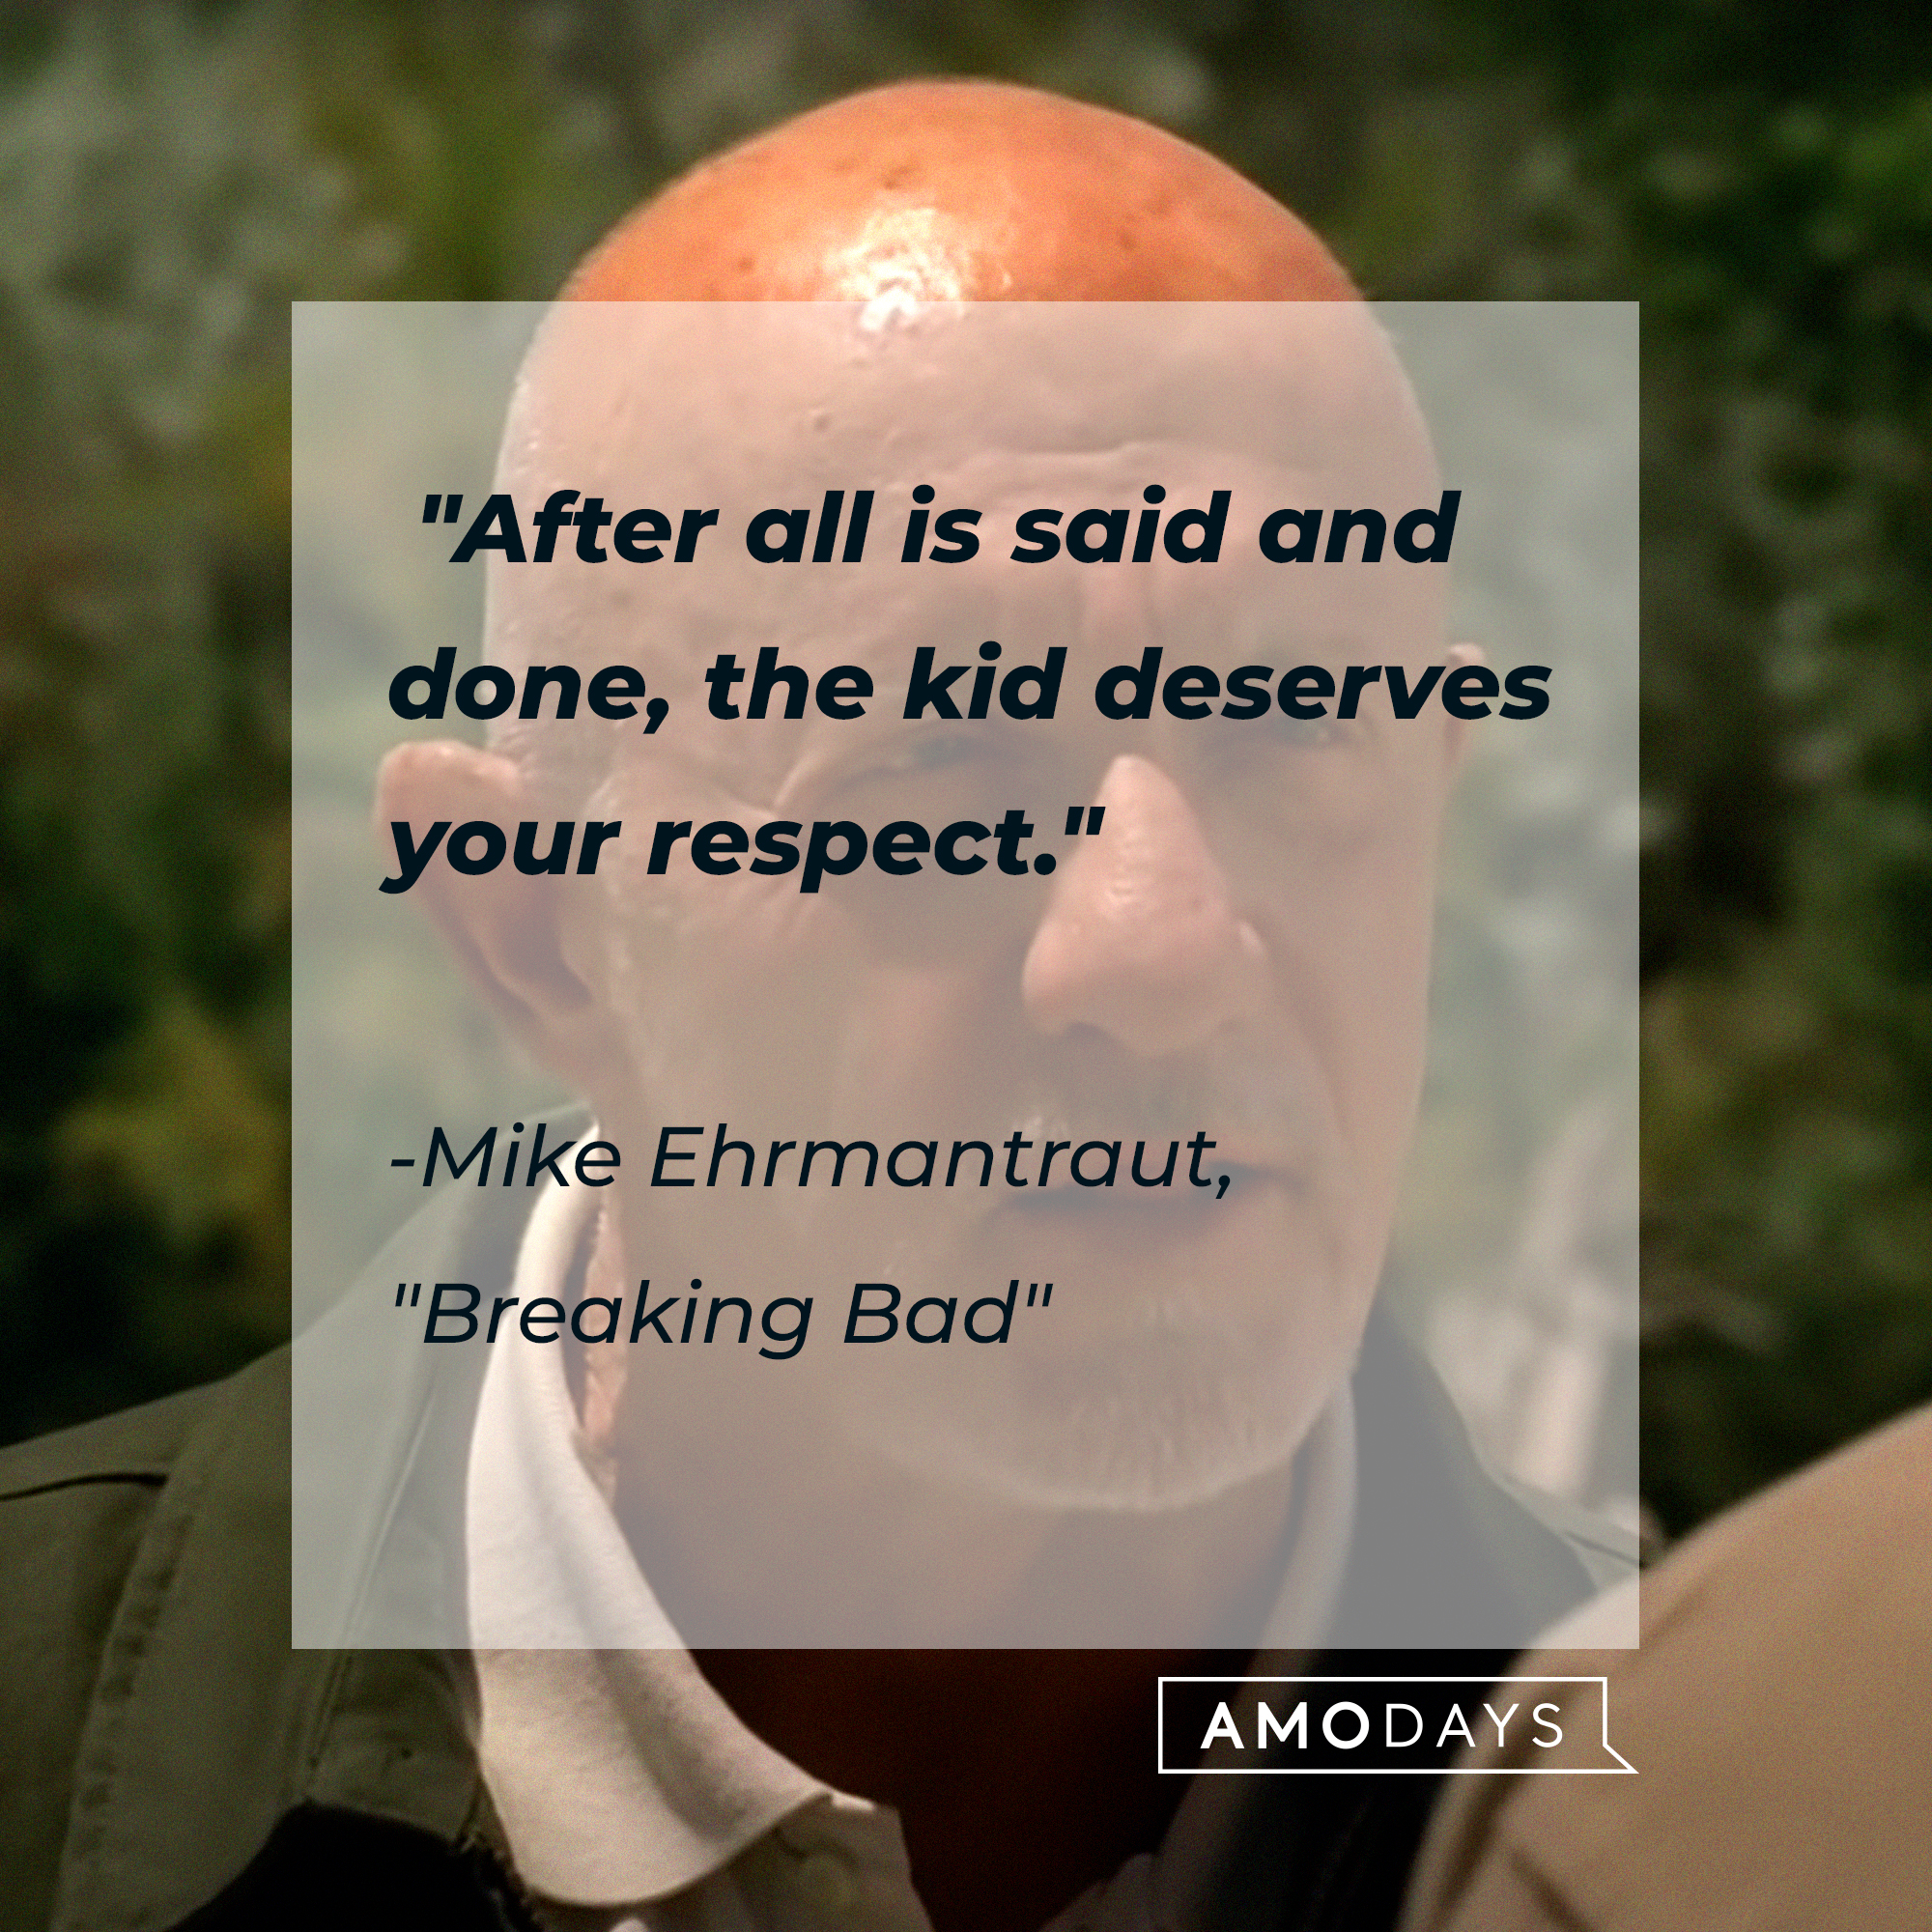 Mike Ehrmantraut with his quote, "After all is said and done, the kid deserves your respect." | Source: youtube.com/breakingbad